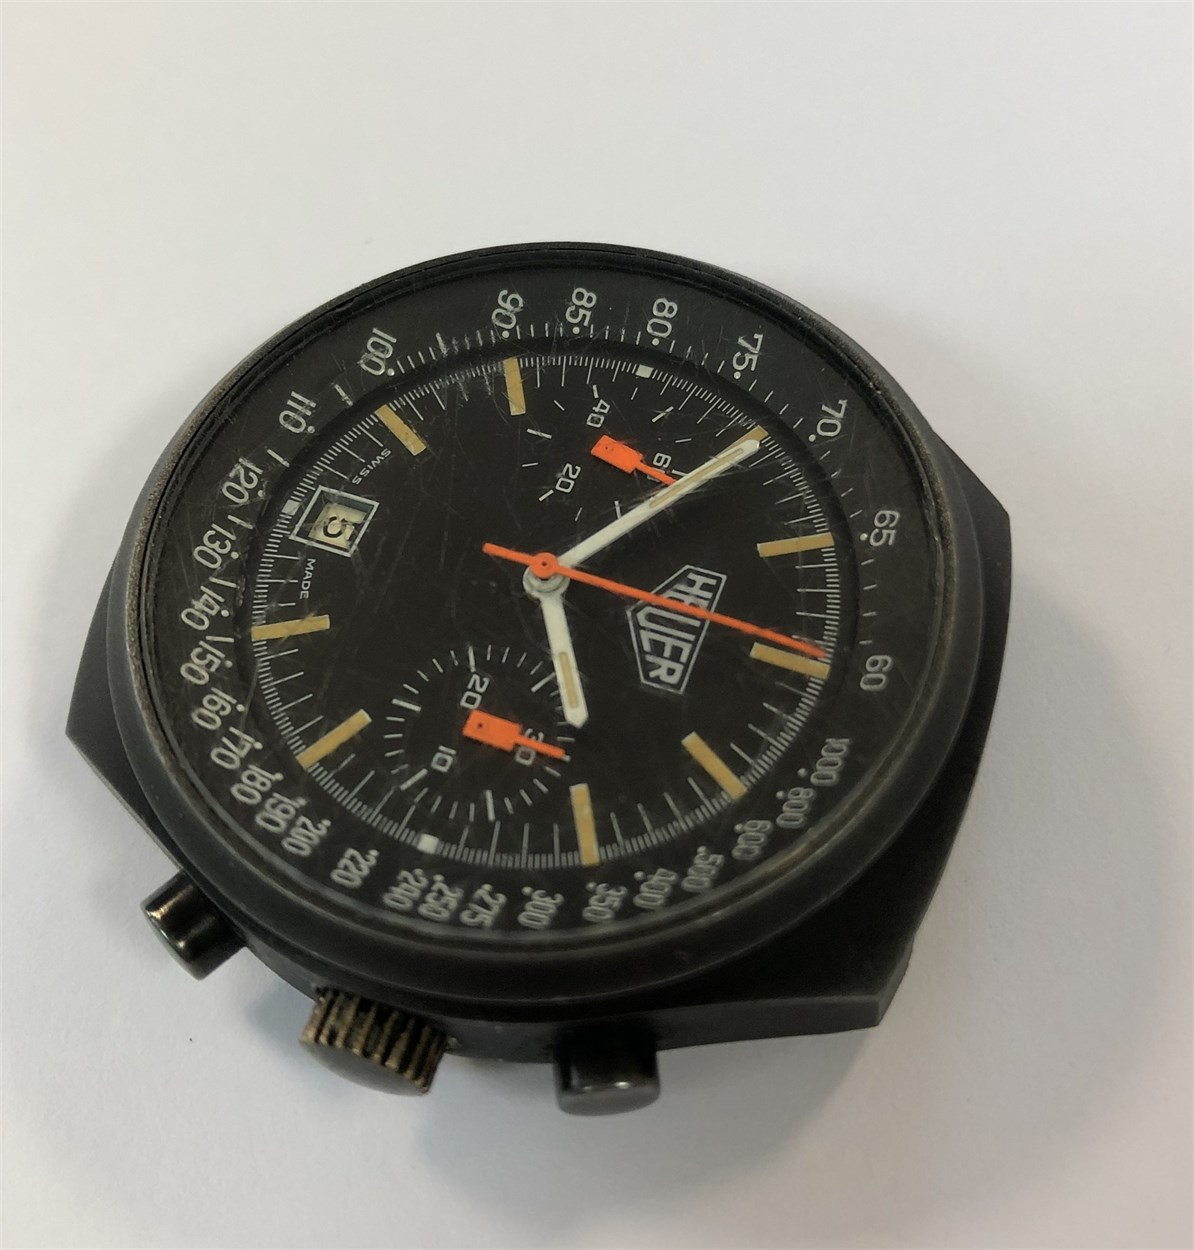 Heuer - A gentleman's rare PVD coated stainless steel chronograph watch head, - Image 2 of 7